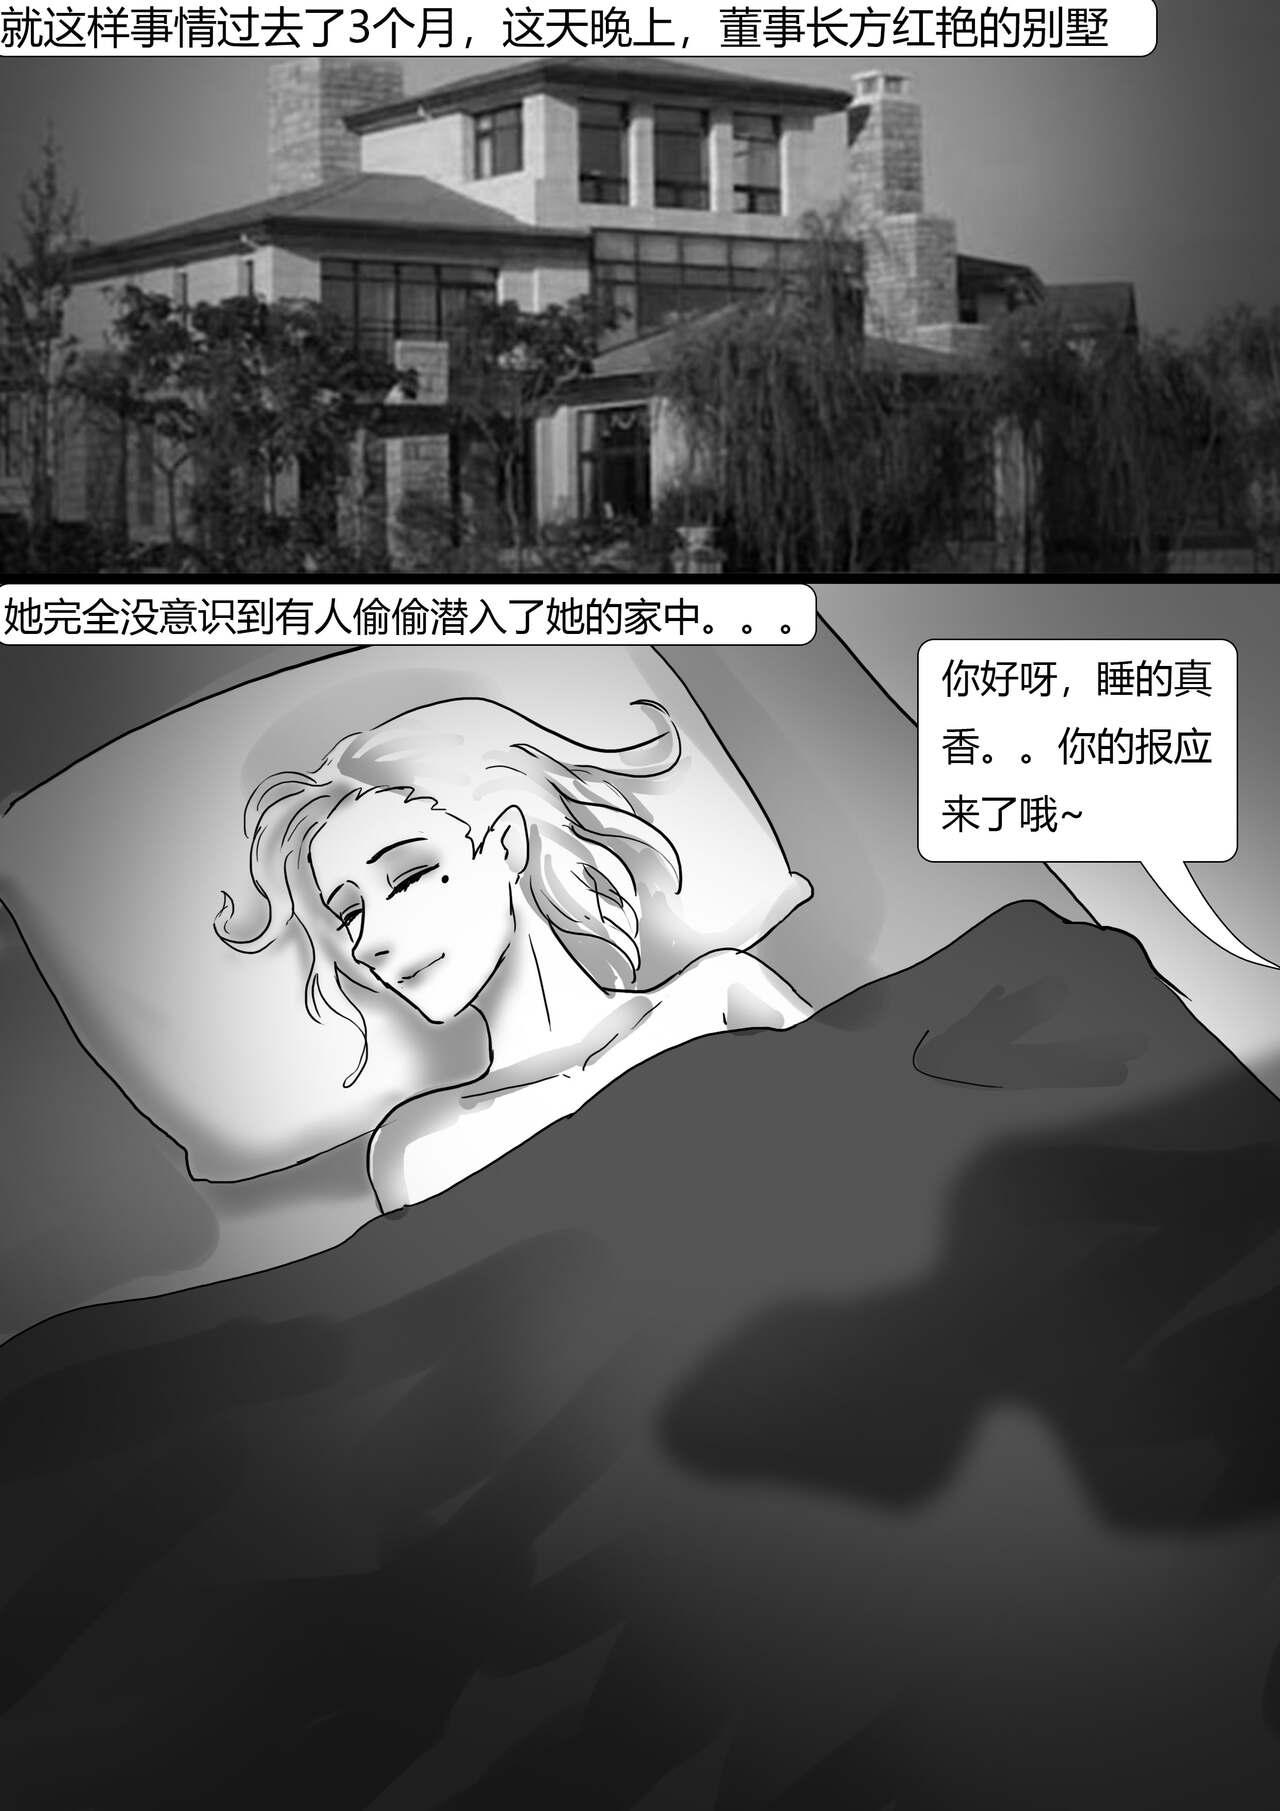 Shaking 生死时速 Time Chacing Super - Page 4